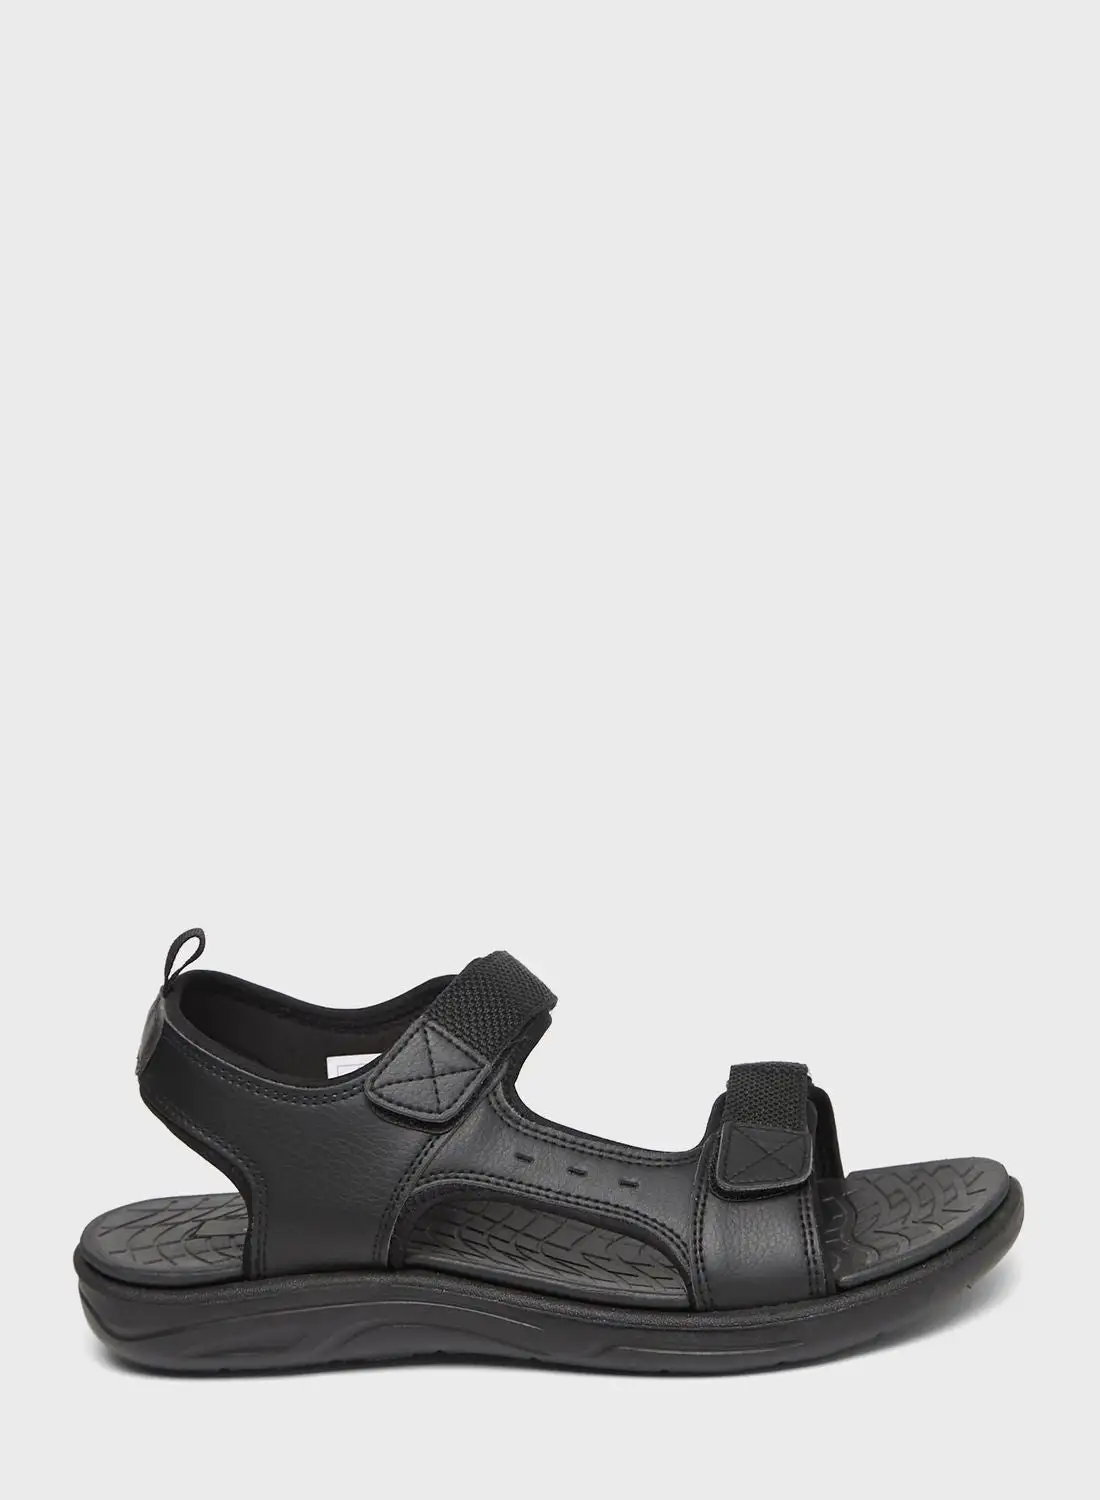 LBL by Shoexpress Casual Velcro Sandals